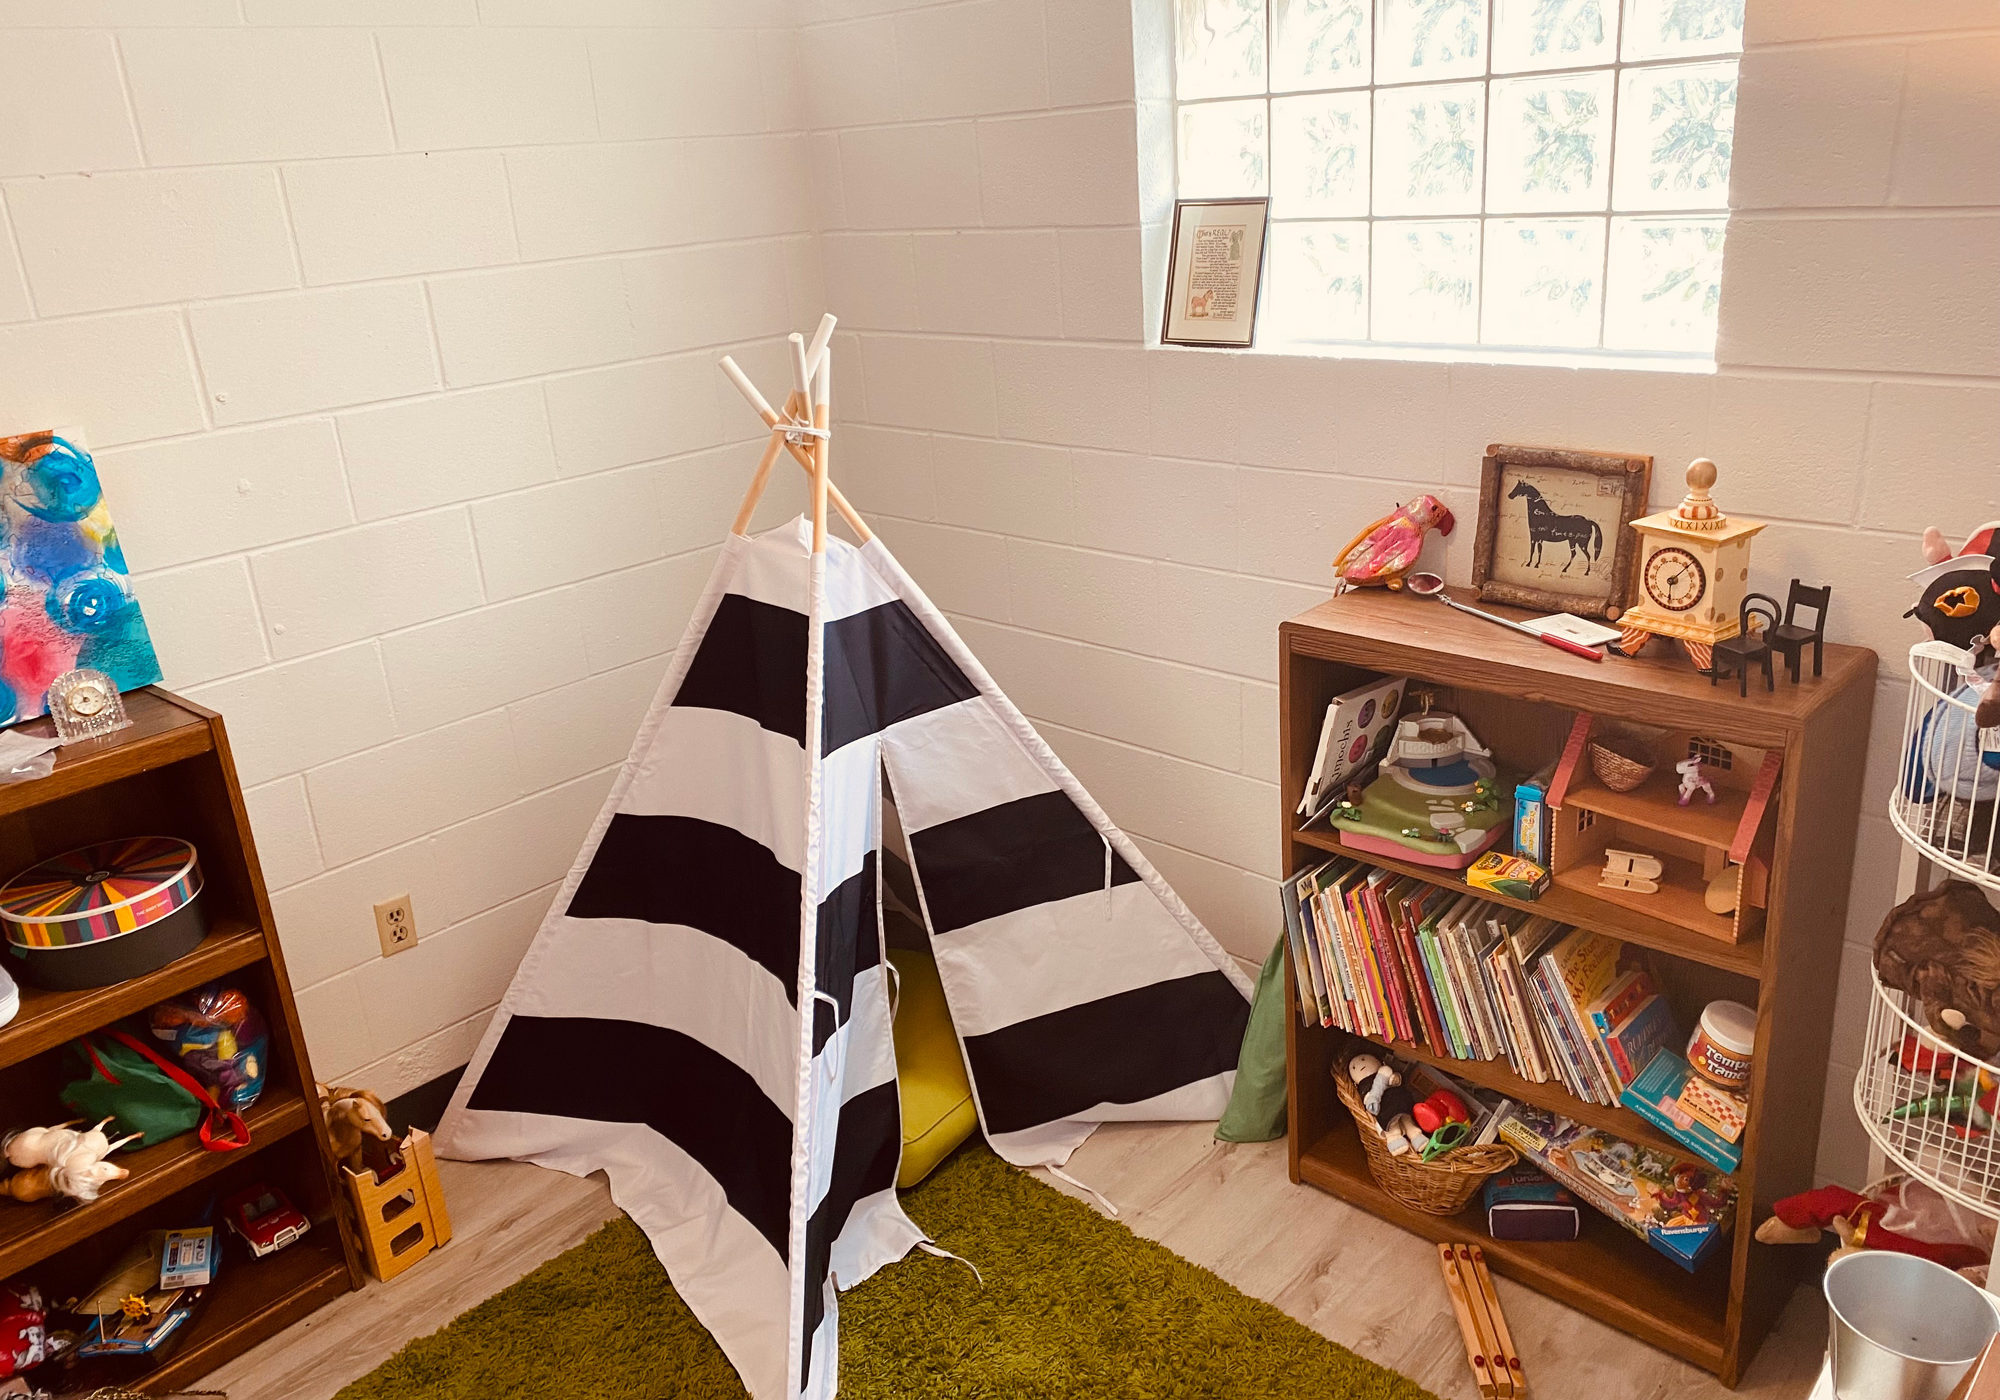 A comfortable space for play therapy.